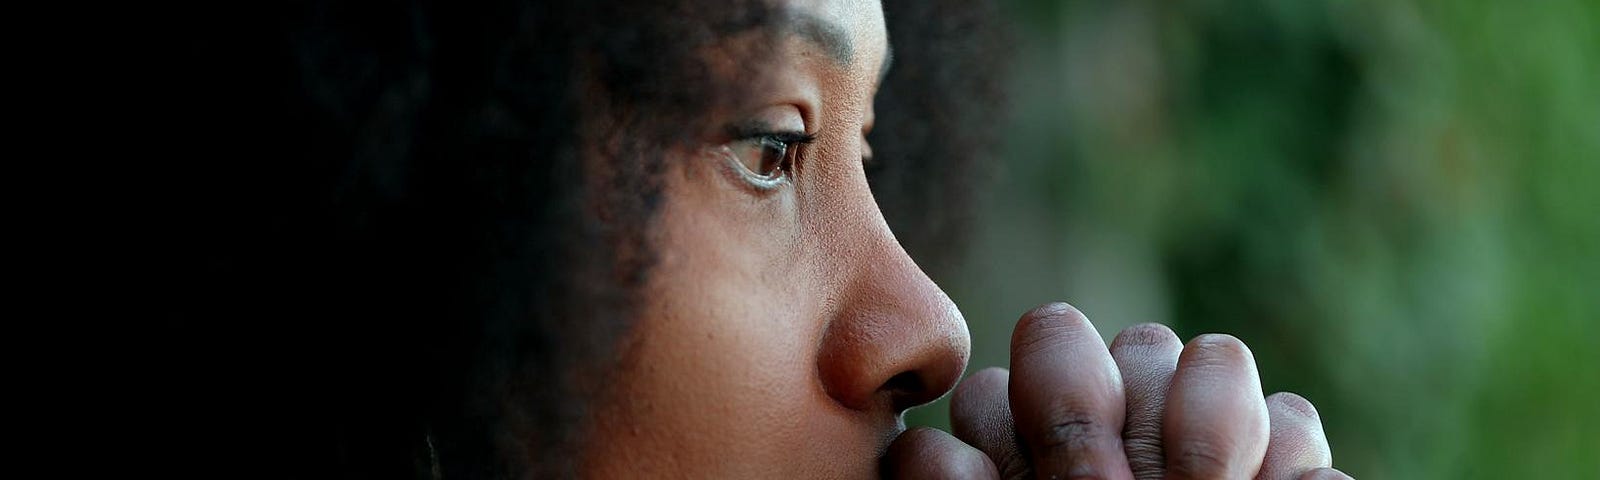 Close-up of a woman’s face with praying hands covering her mouth.